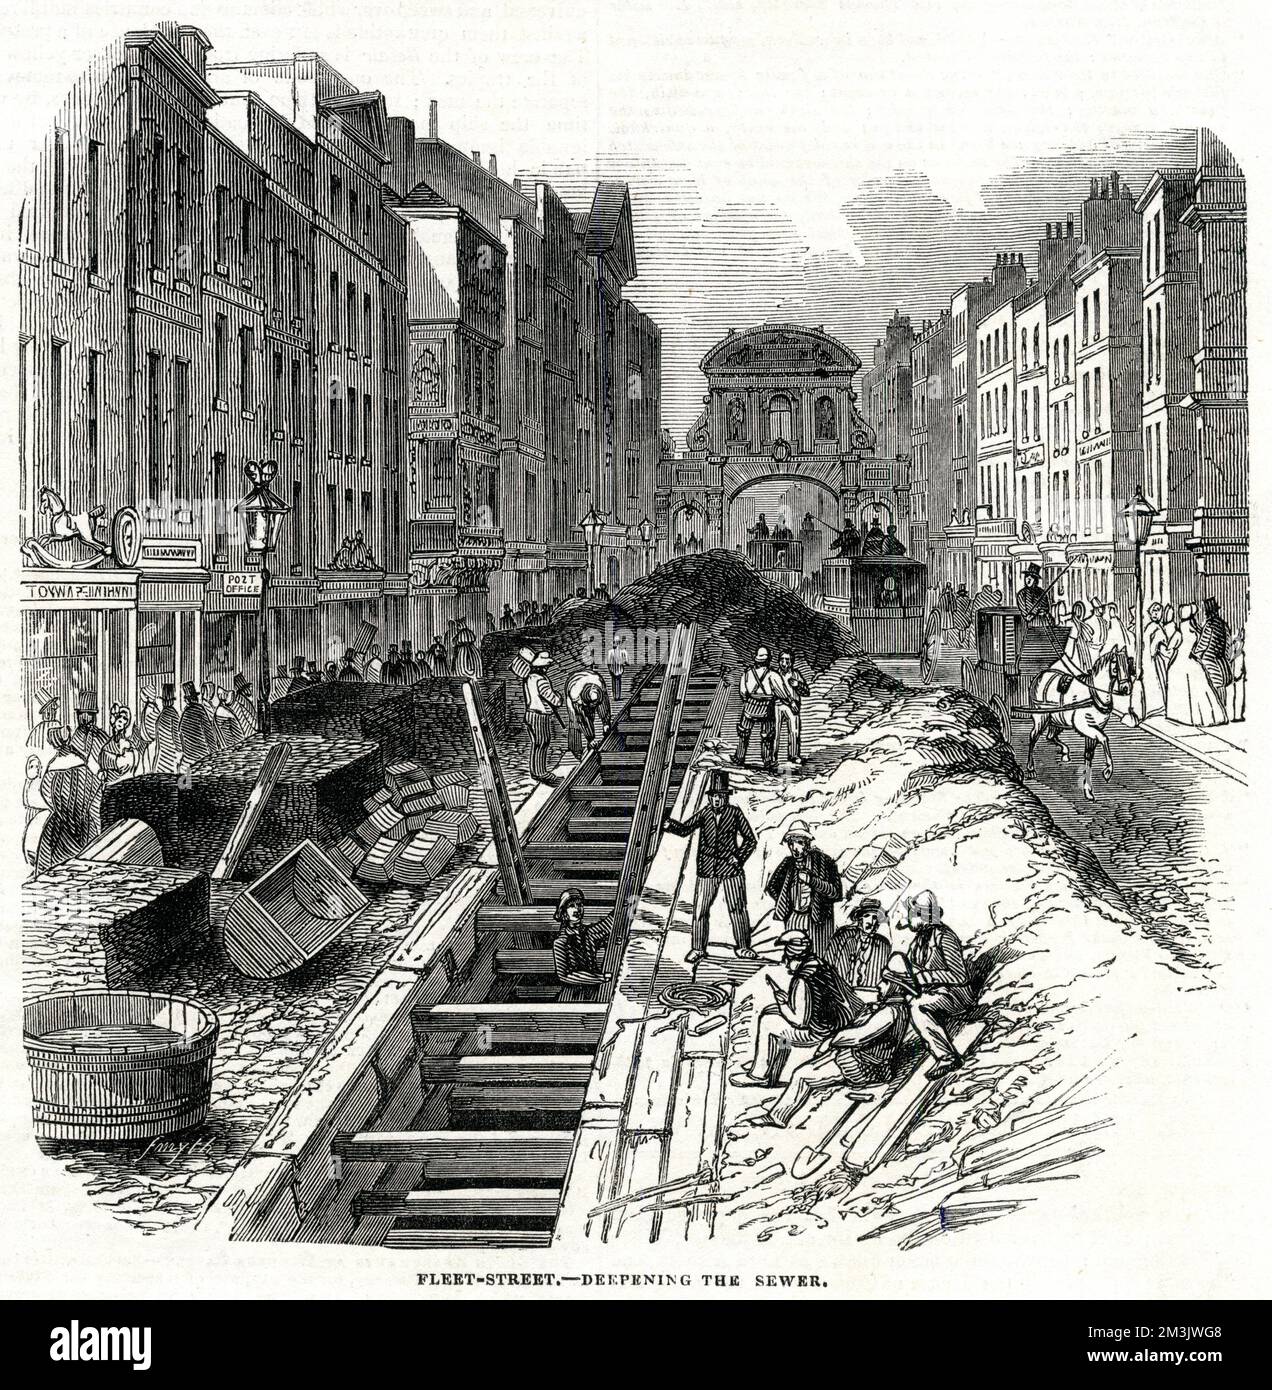 Cholera epidemics, the 'Great Stink' and miasmas combined to create a death rate higher than at any time since the Black Death forcing reformers to face up to the need for an urban planning policy for the first time. Joseph Bazalgette (1819-1891) constructed London's first drainage system and was a notable pioneer of public health engineering.     Date: 1845 Stock Photo